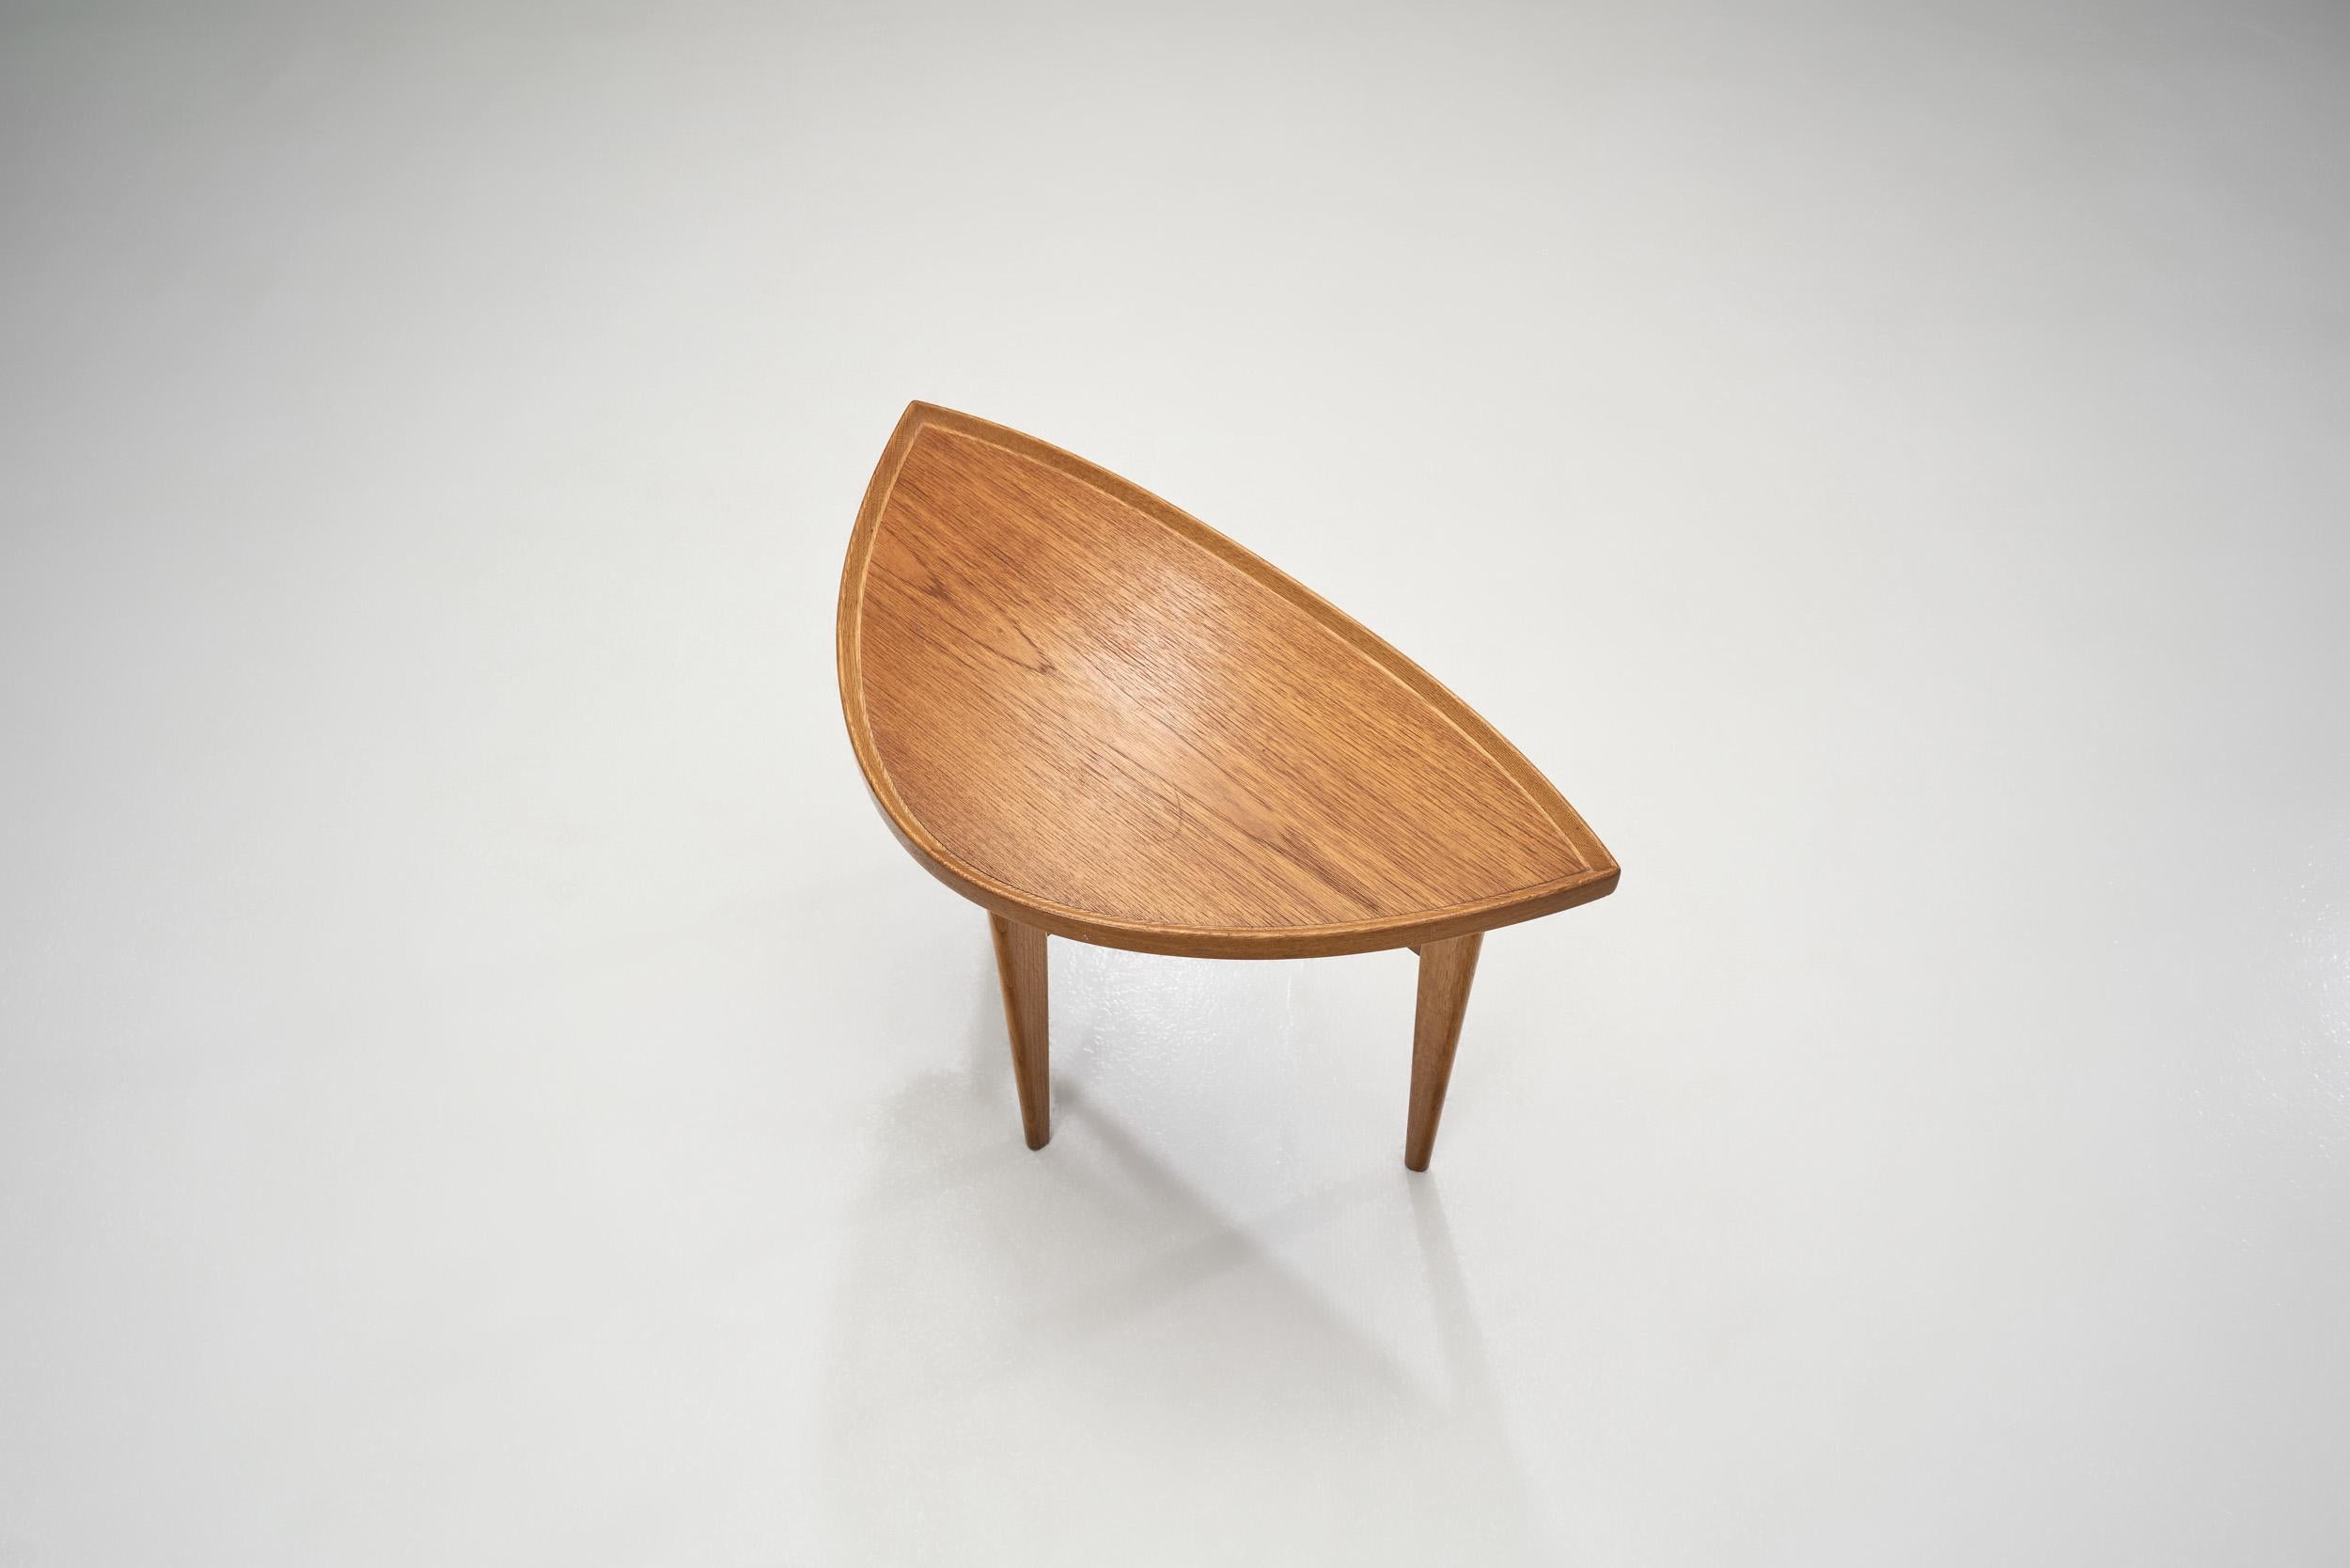 Mid-20th Century Mid-Century Modern Solid Wood Side Table, Sweden 1950s For Sale